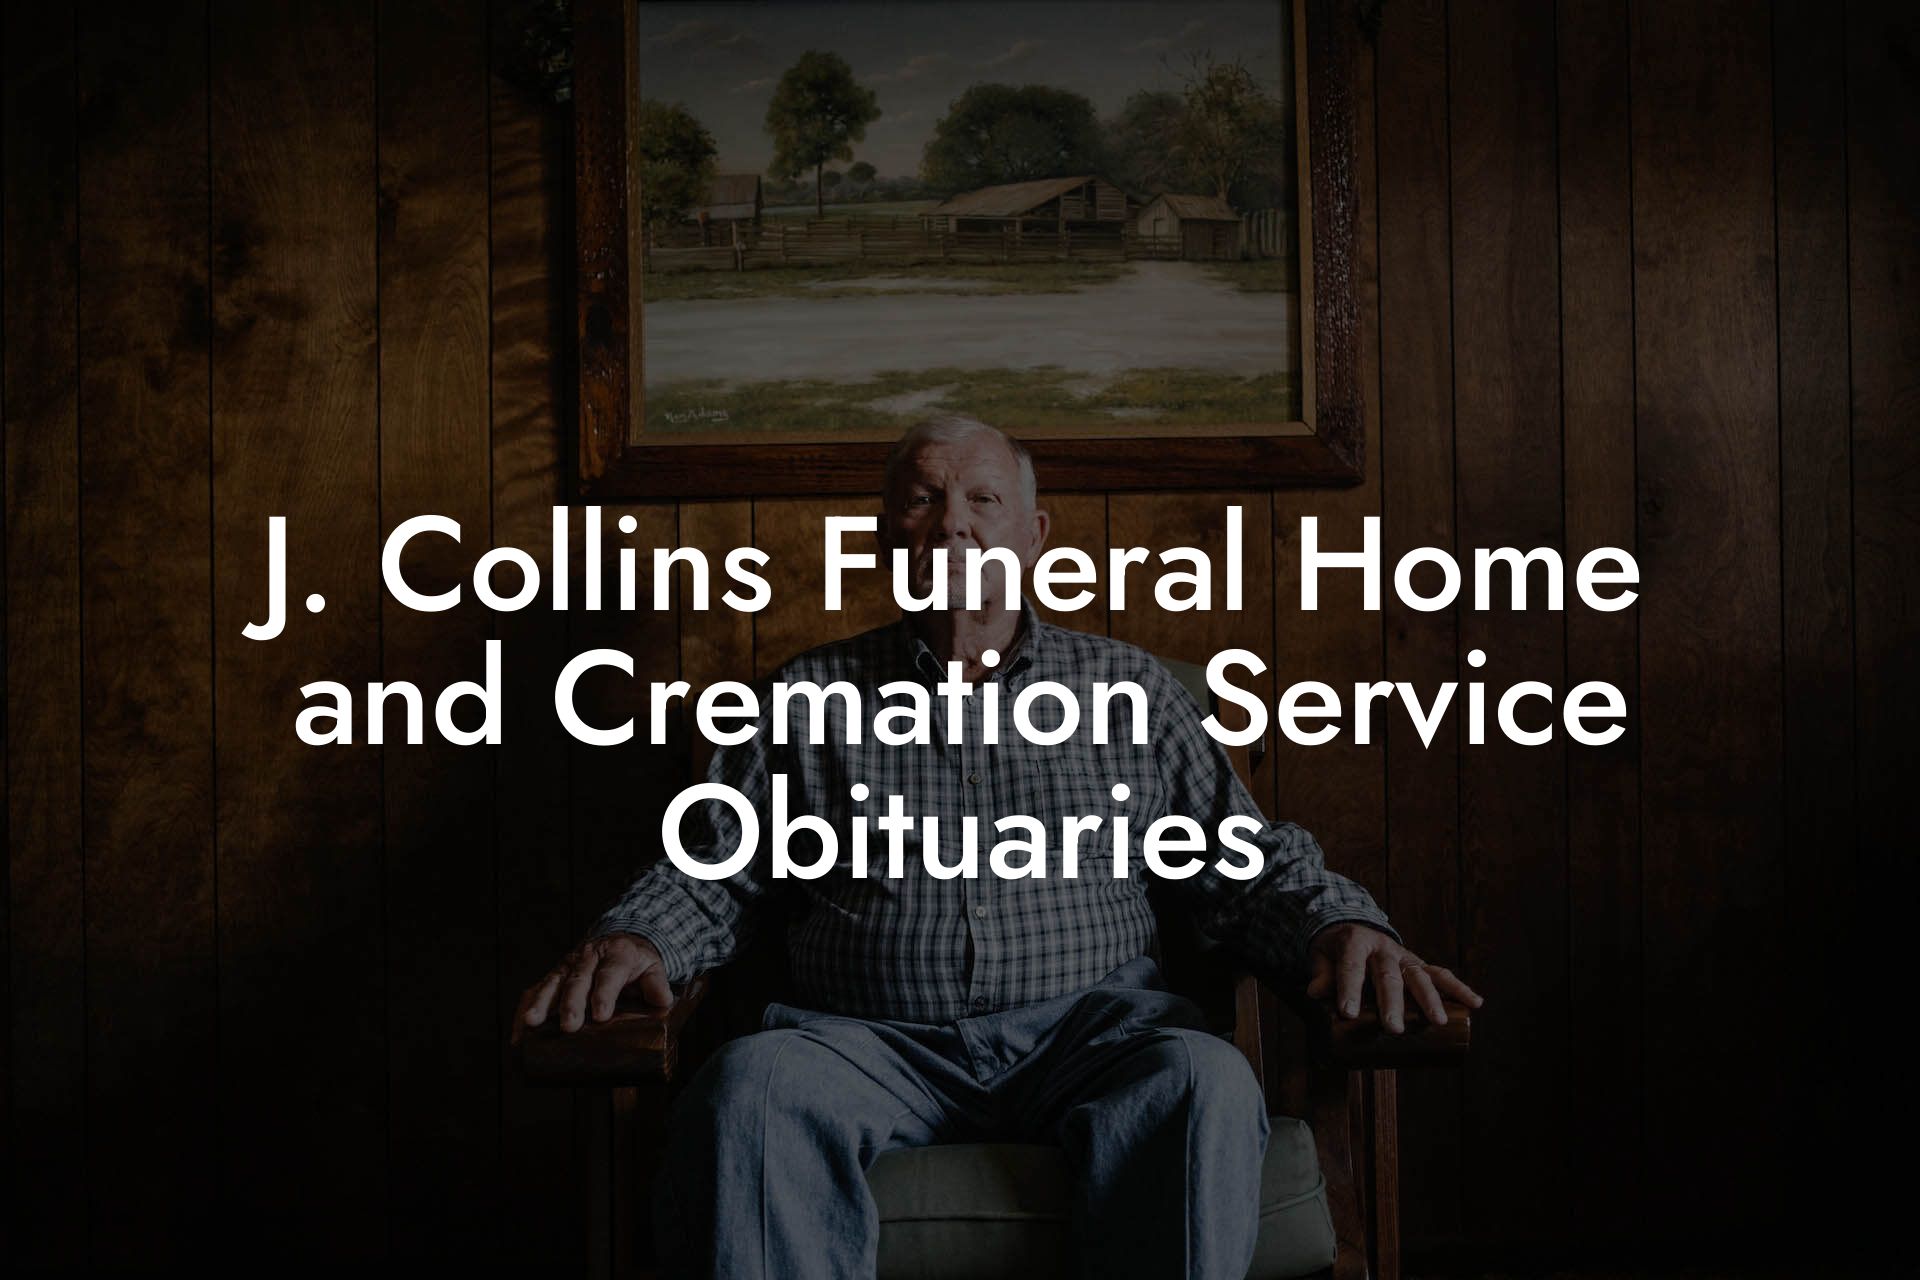 J. Collins Funeral Home and Cremation Service Obituaries